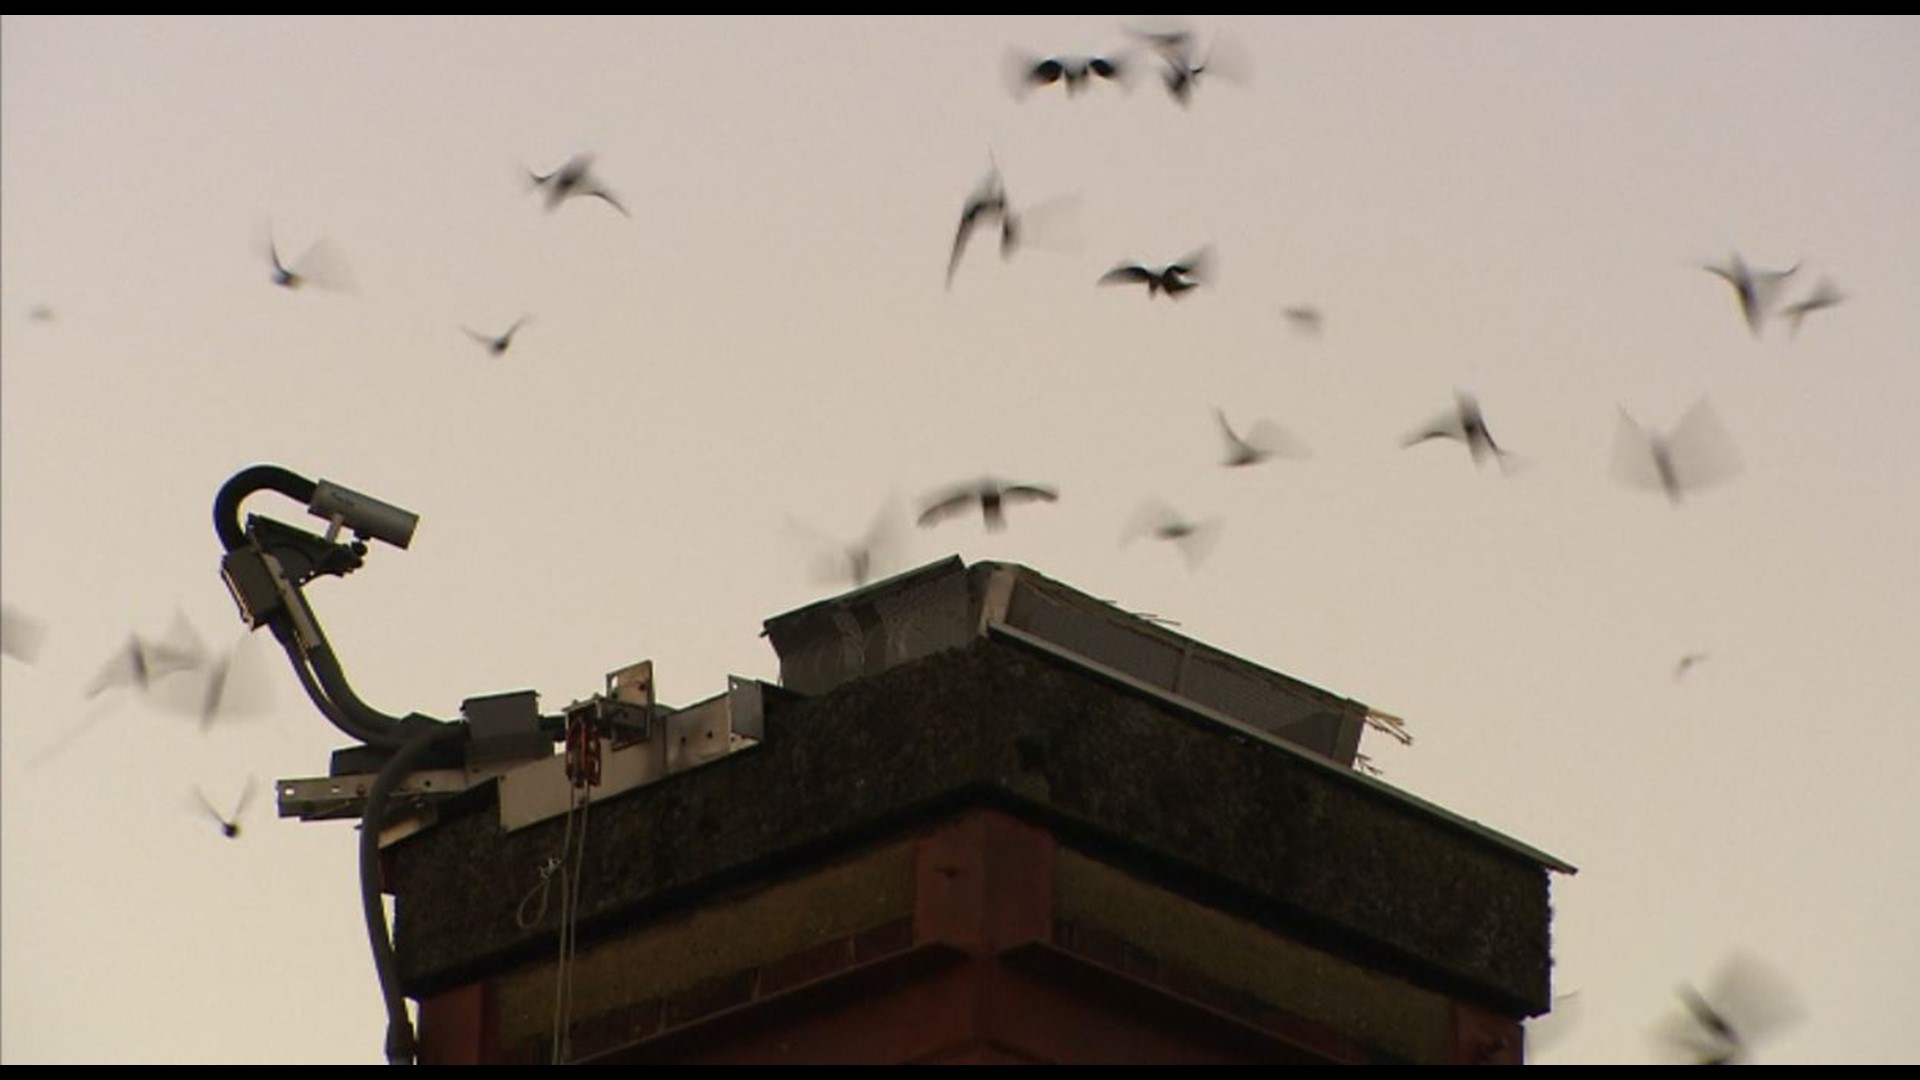 Yesterday evening around dusk I watched hundreds and hundreds of birds  flying over my house. What were they?